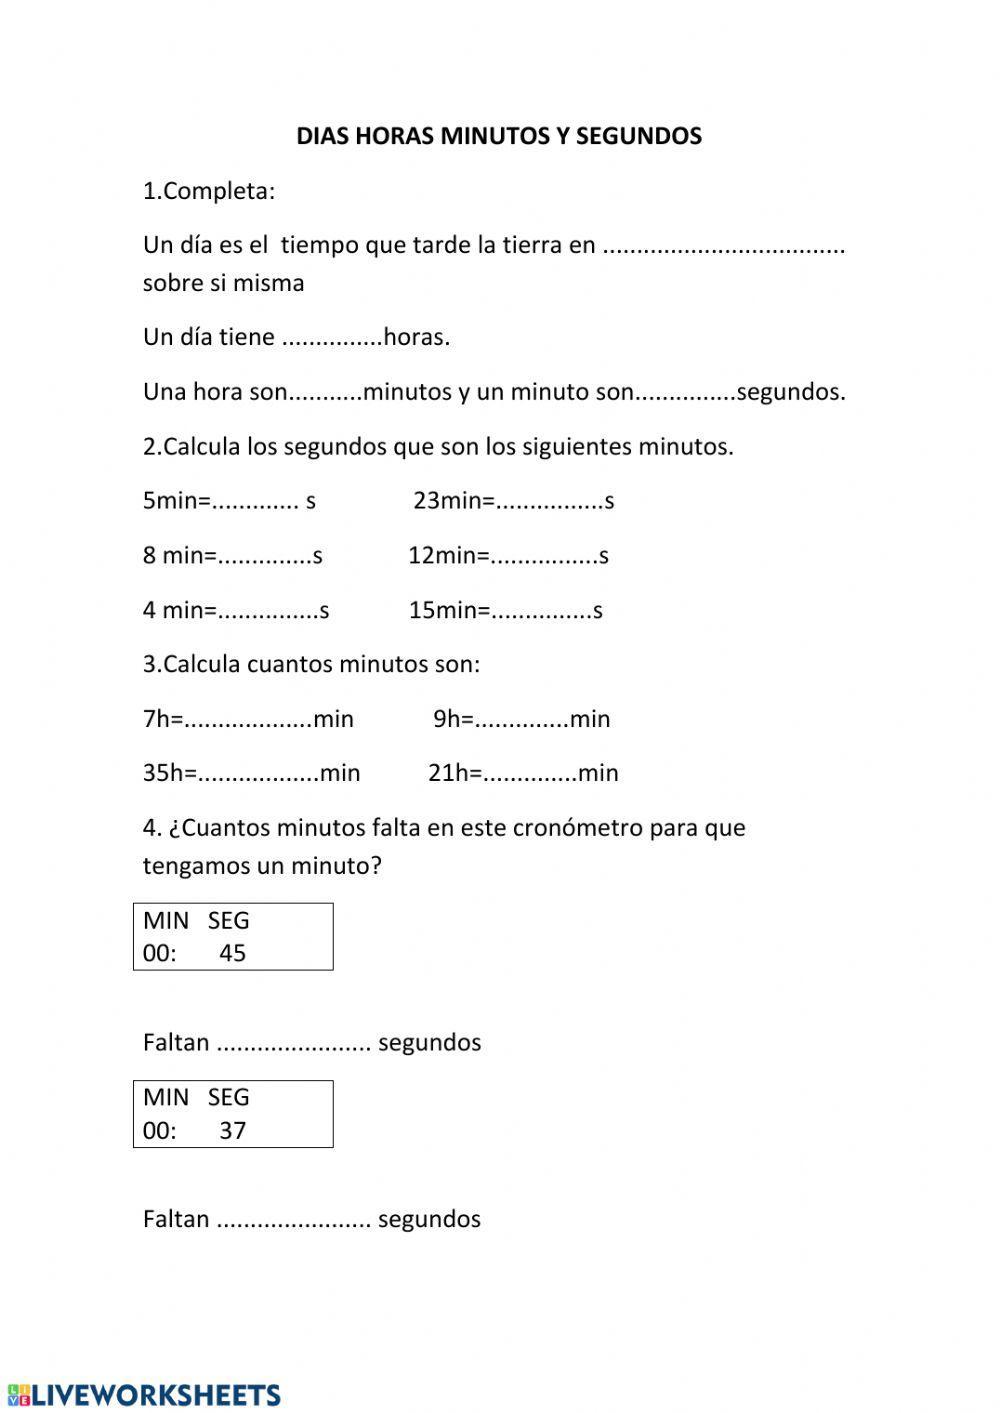 DIA,HORA Y MINUTOS online exercise for